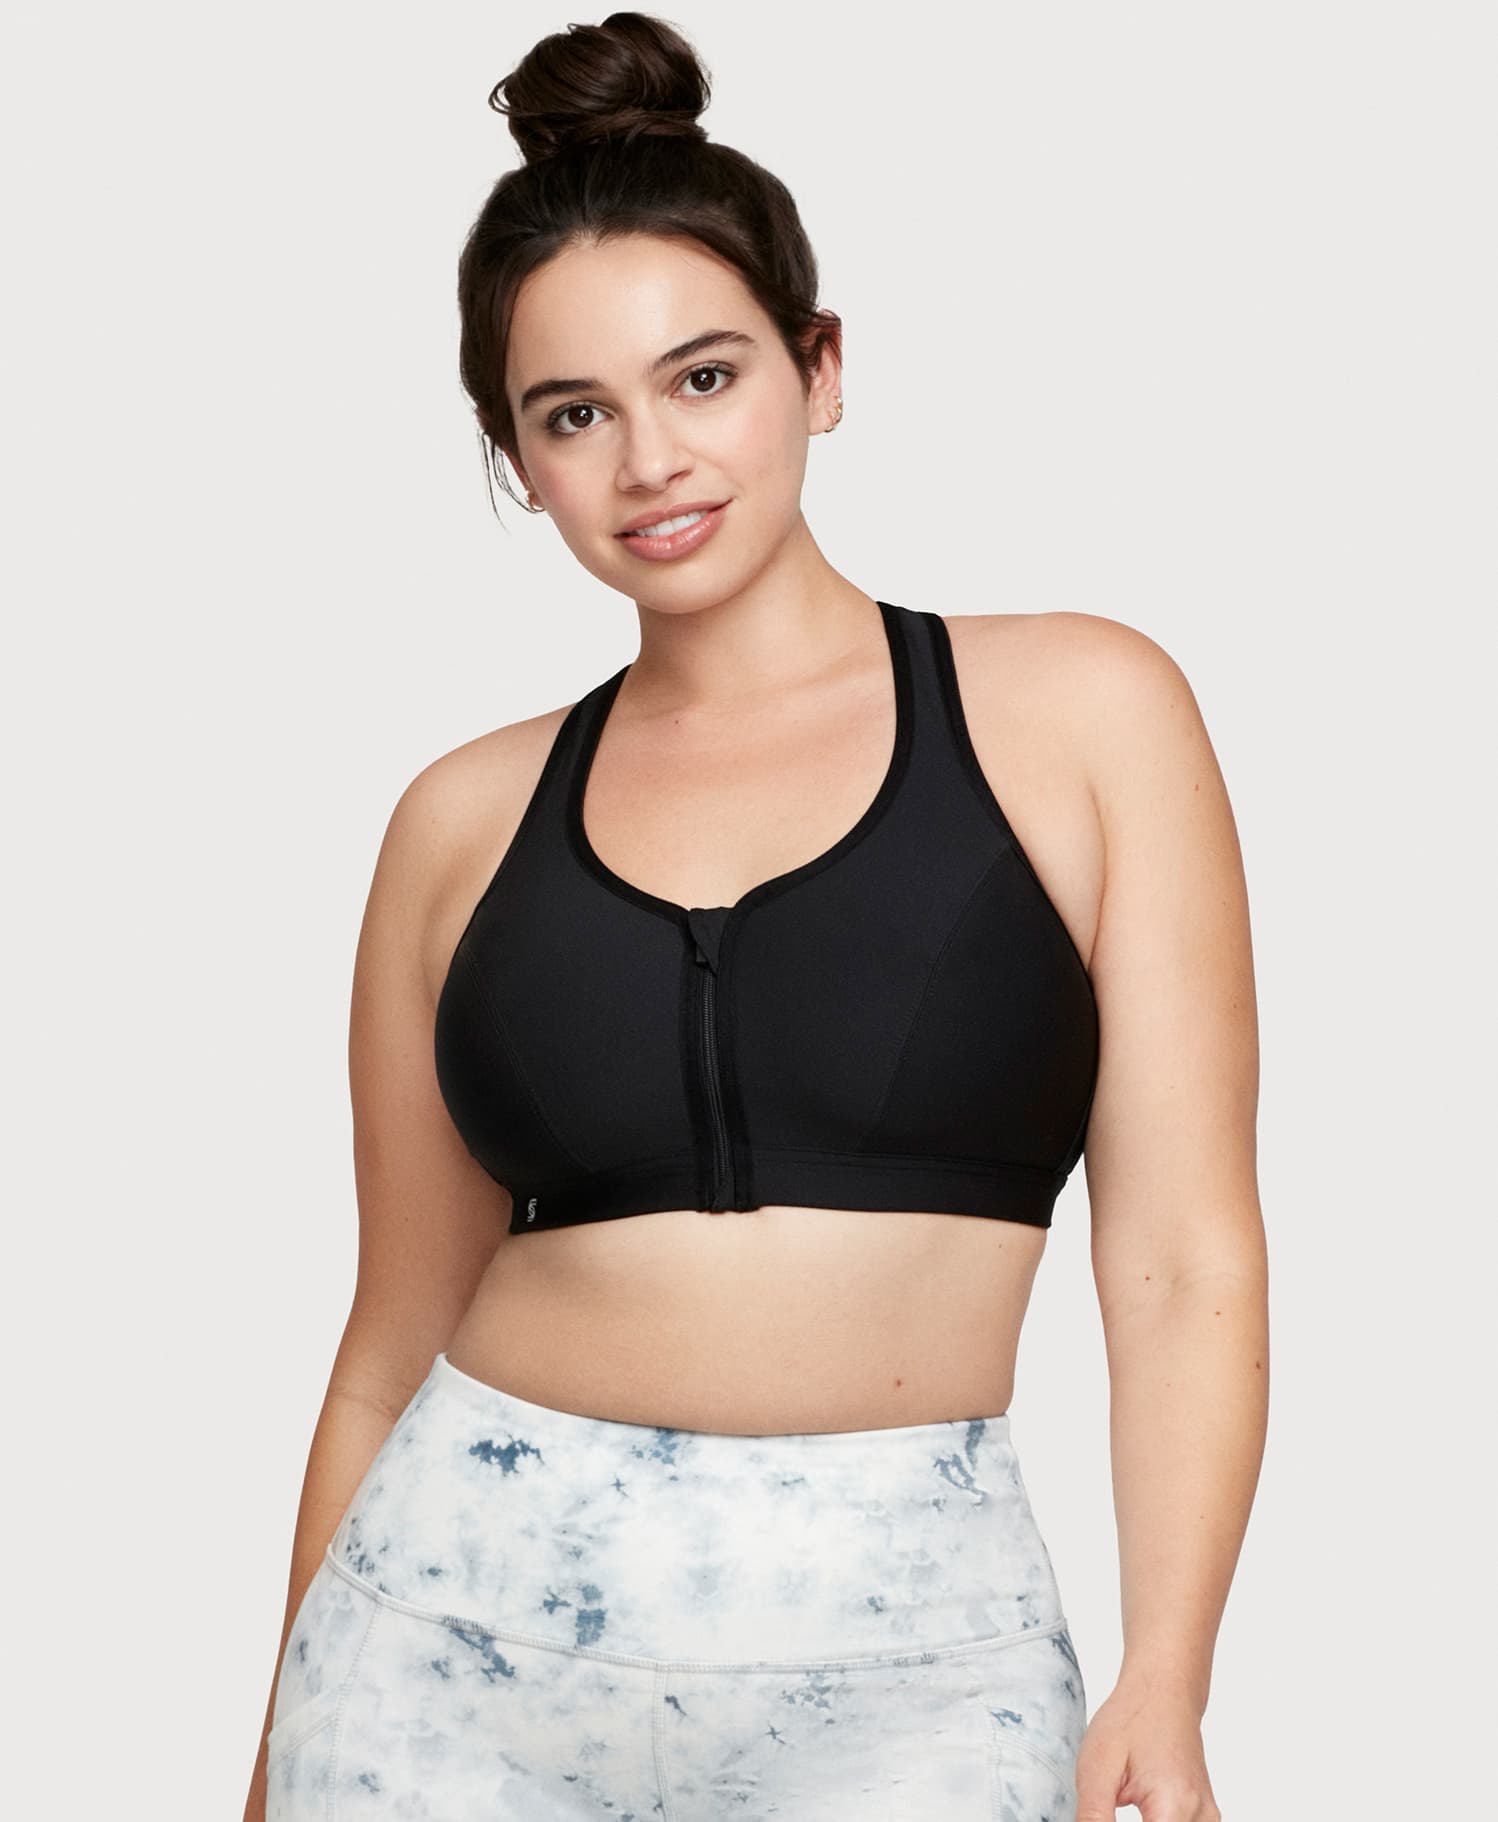 Sports bra with a front closure and high support - Black - Sz. 42 -  Zizzifashion